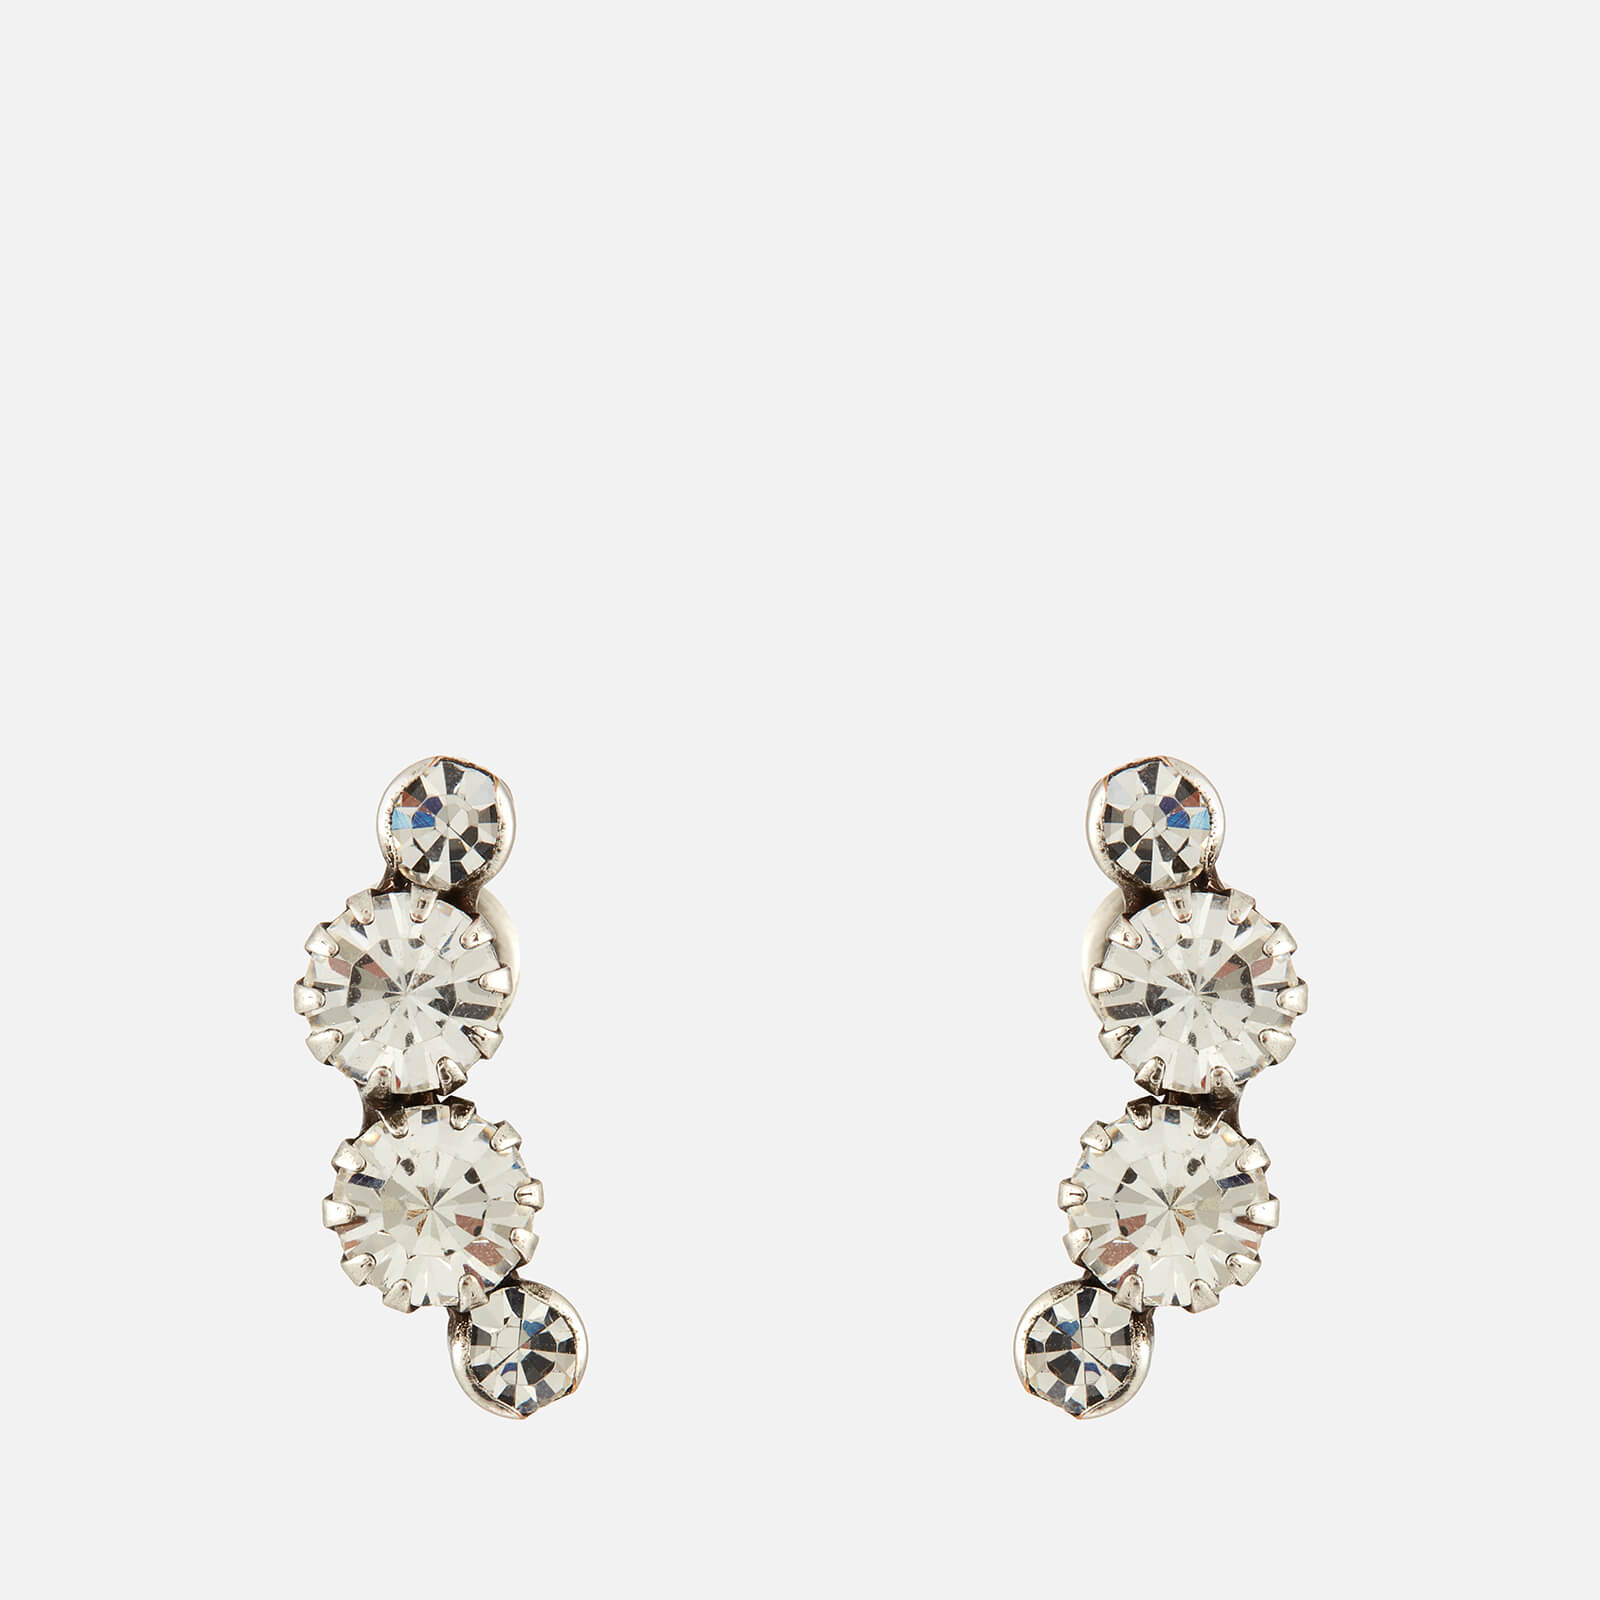 Isabel Marant Silver-Tone and Crystal Stud Earrings